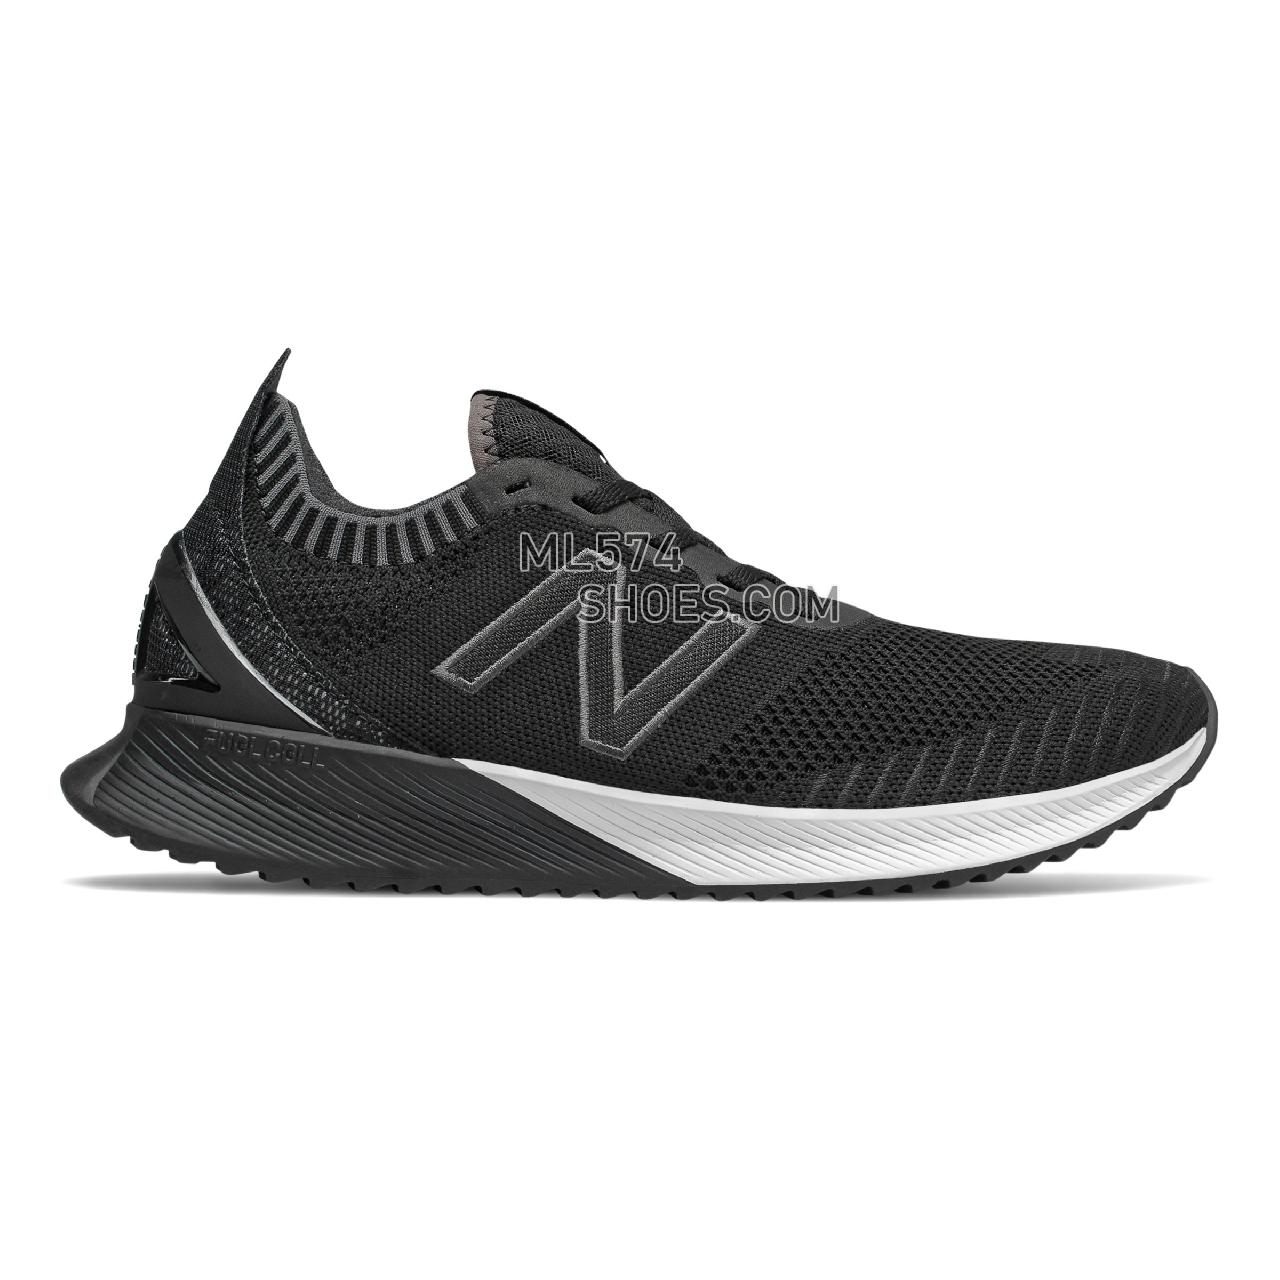 New Balance FuelCell Echo - Men's Neutral Running - Black with Magnet and White - MFCECSK